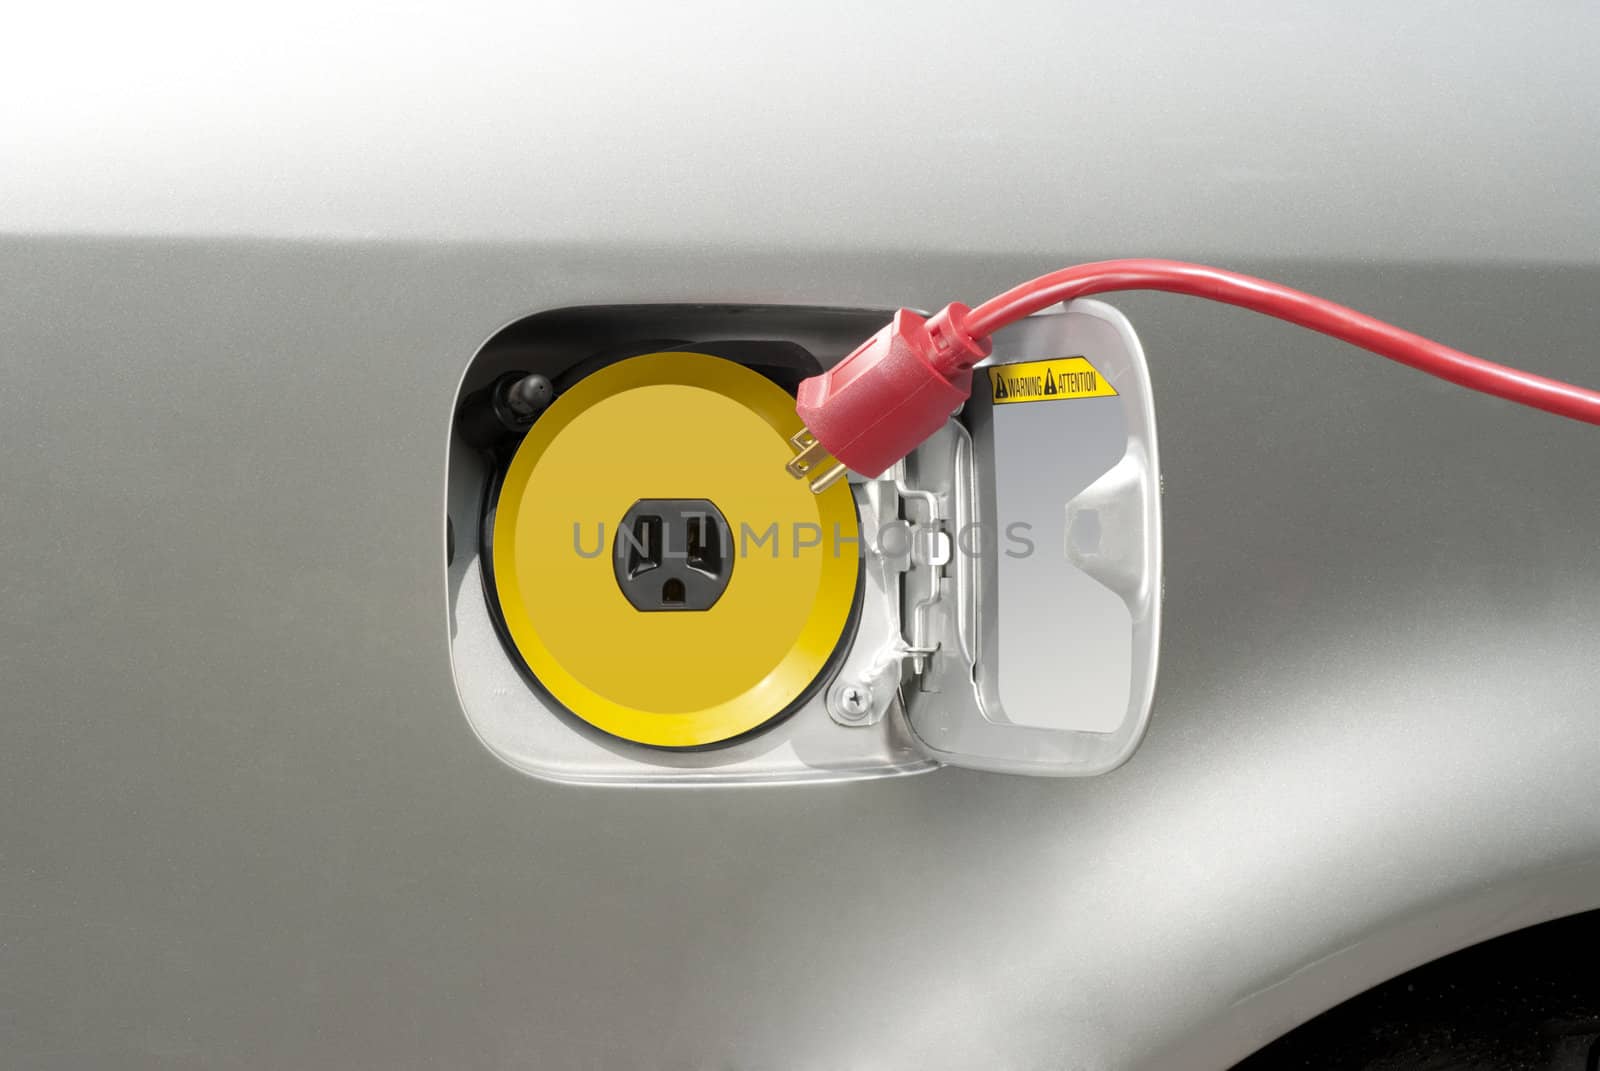 Household electric cord plugging into an electric vehicle